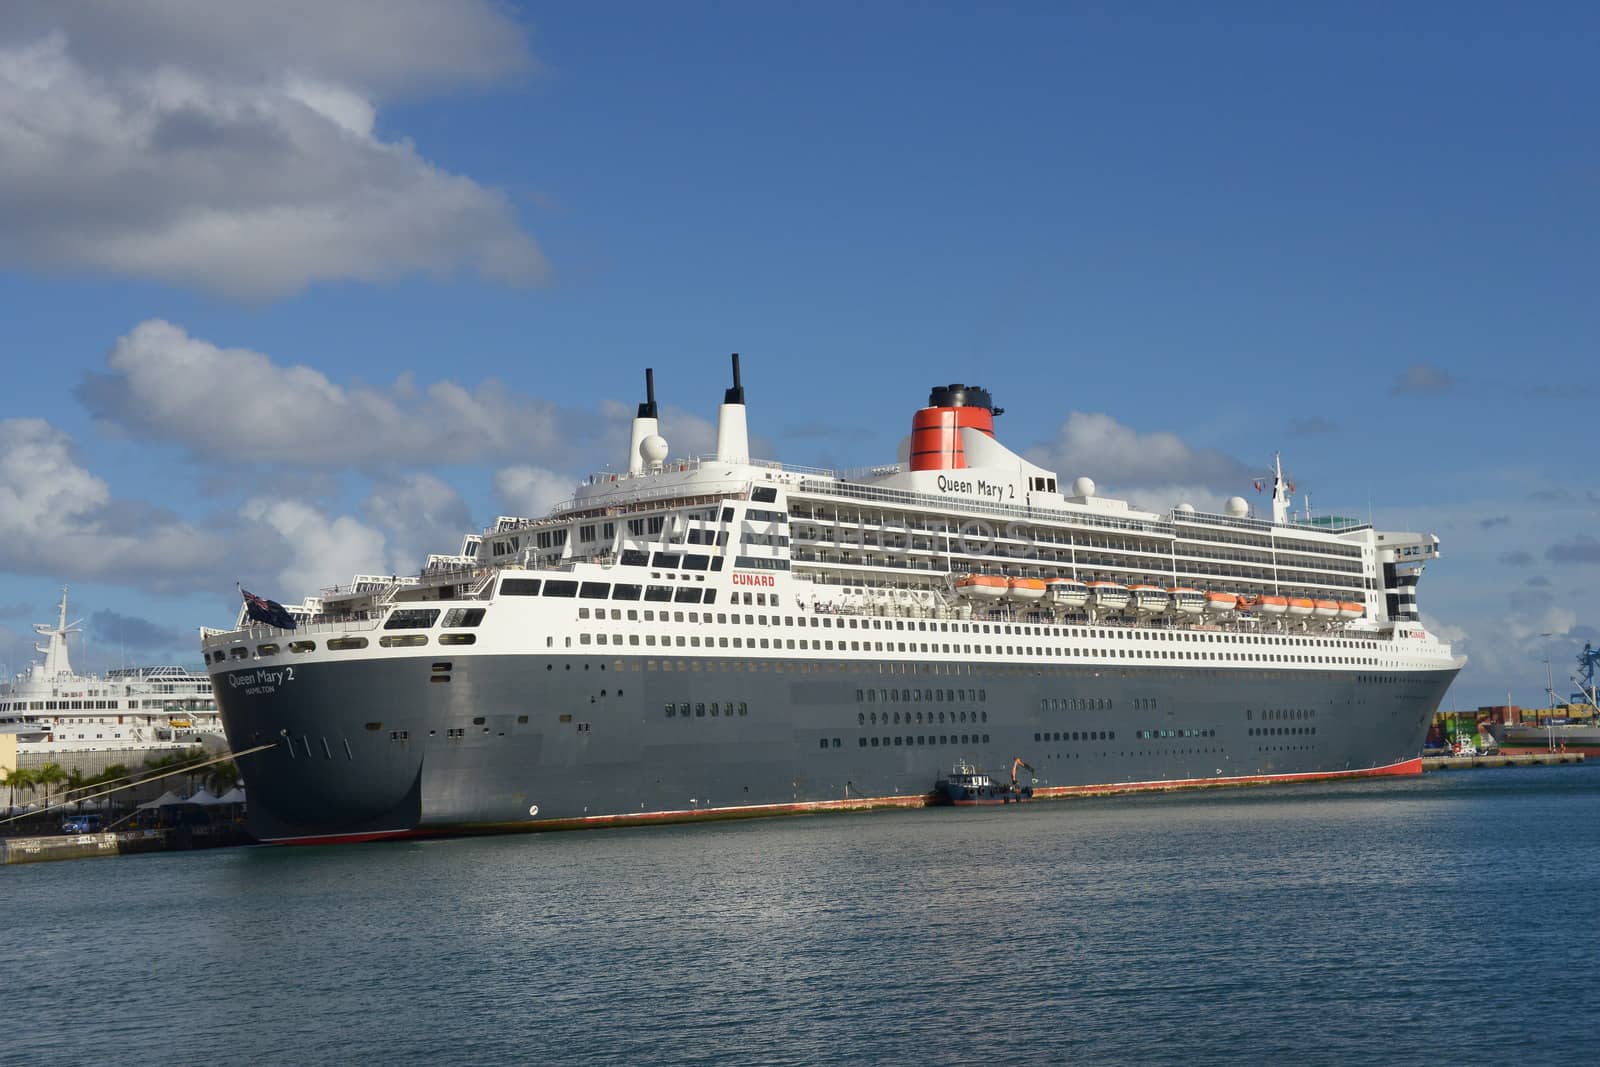 Queen Mary 2 liner by gorilla